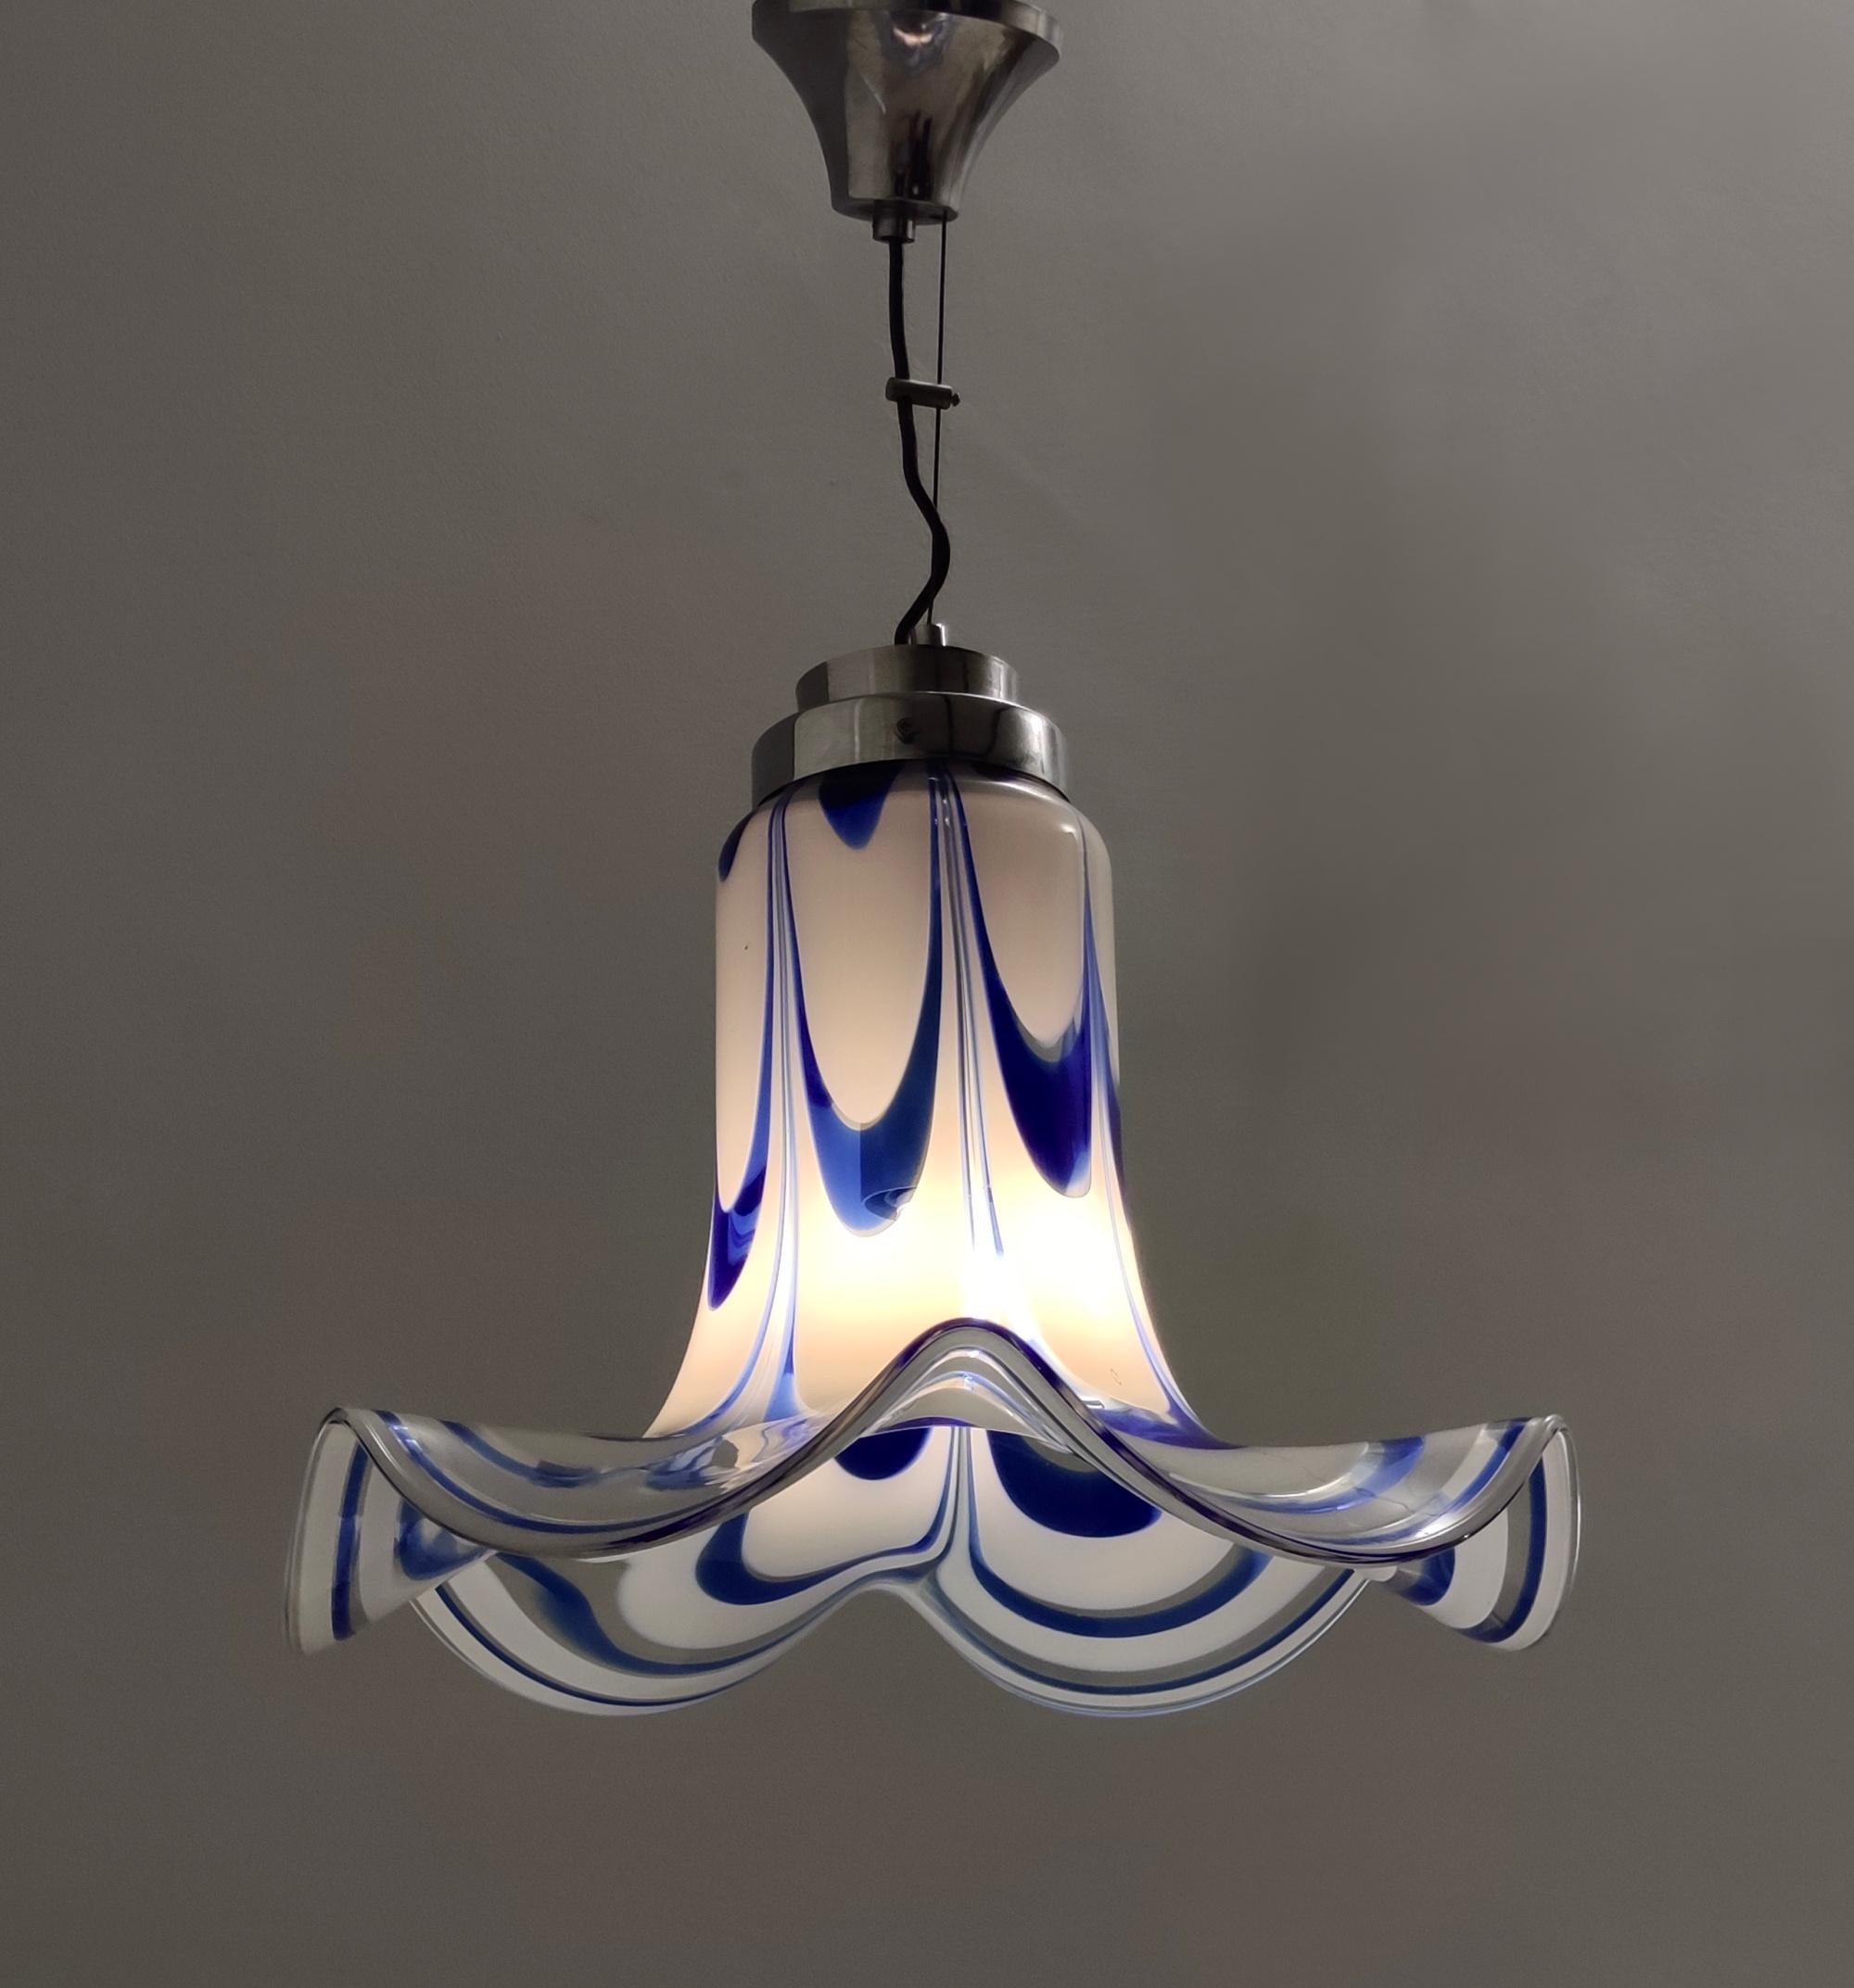 Made in Italy, 1970s. 
This pendant features a bell-shaped blue and white Murano glass lampshade.
It is a vintage piece, therefore it might show slight traces of use, but it can be considered as in excellent original condition and ready to give